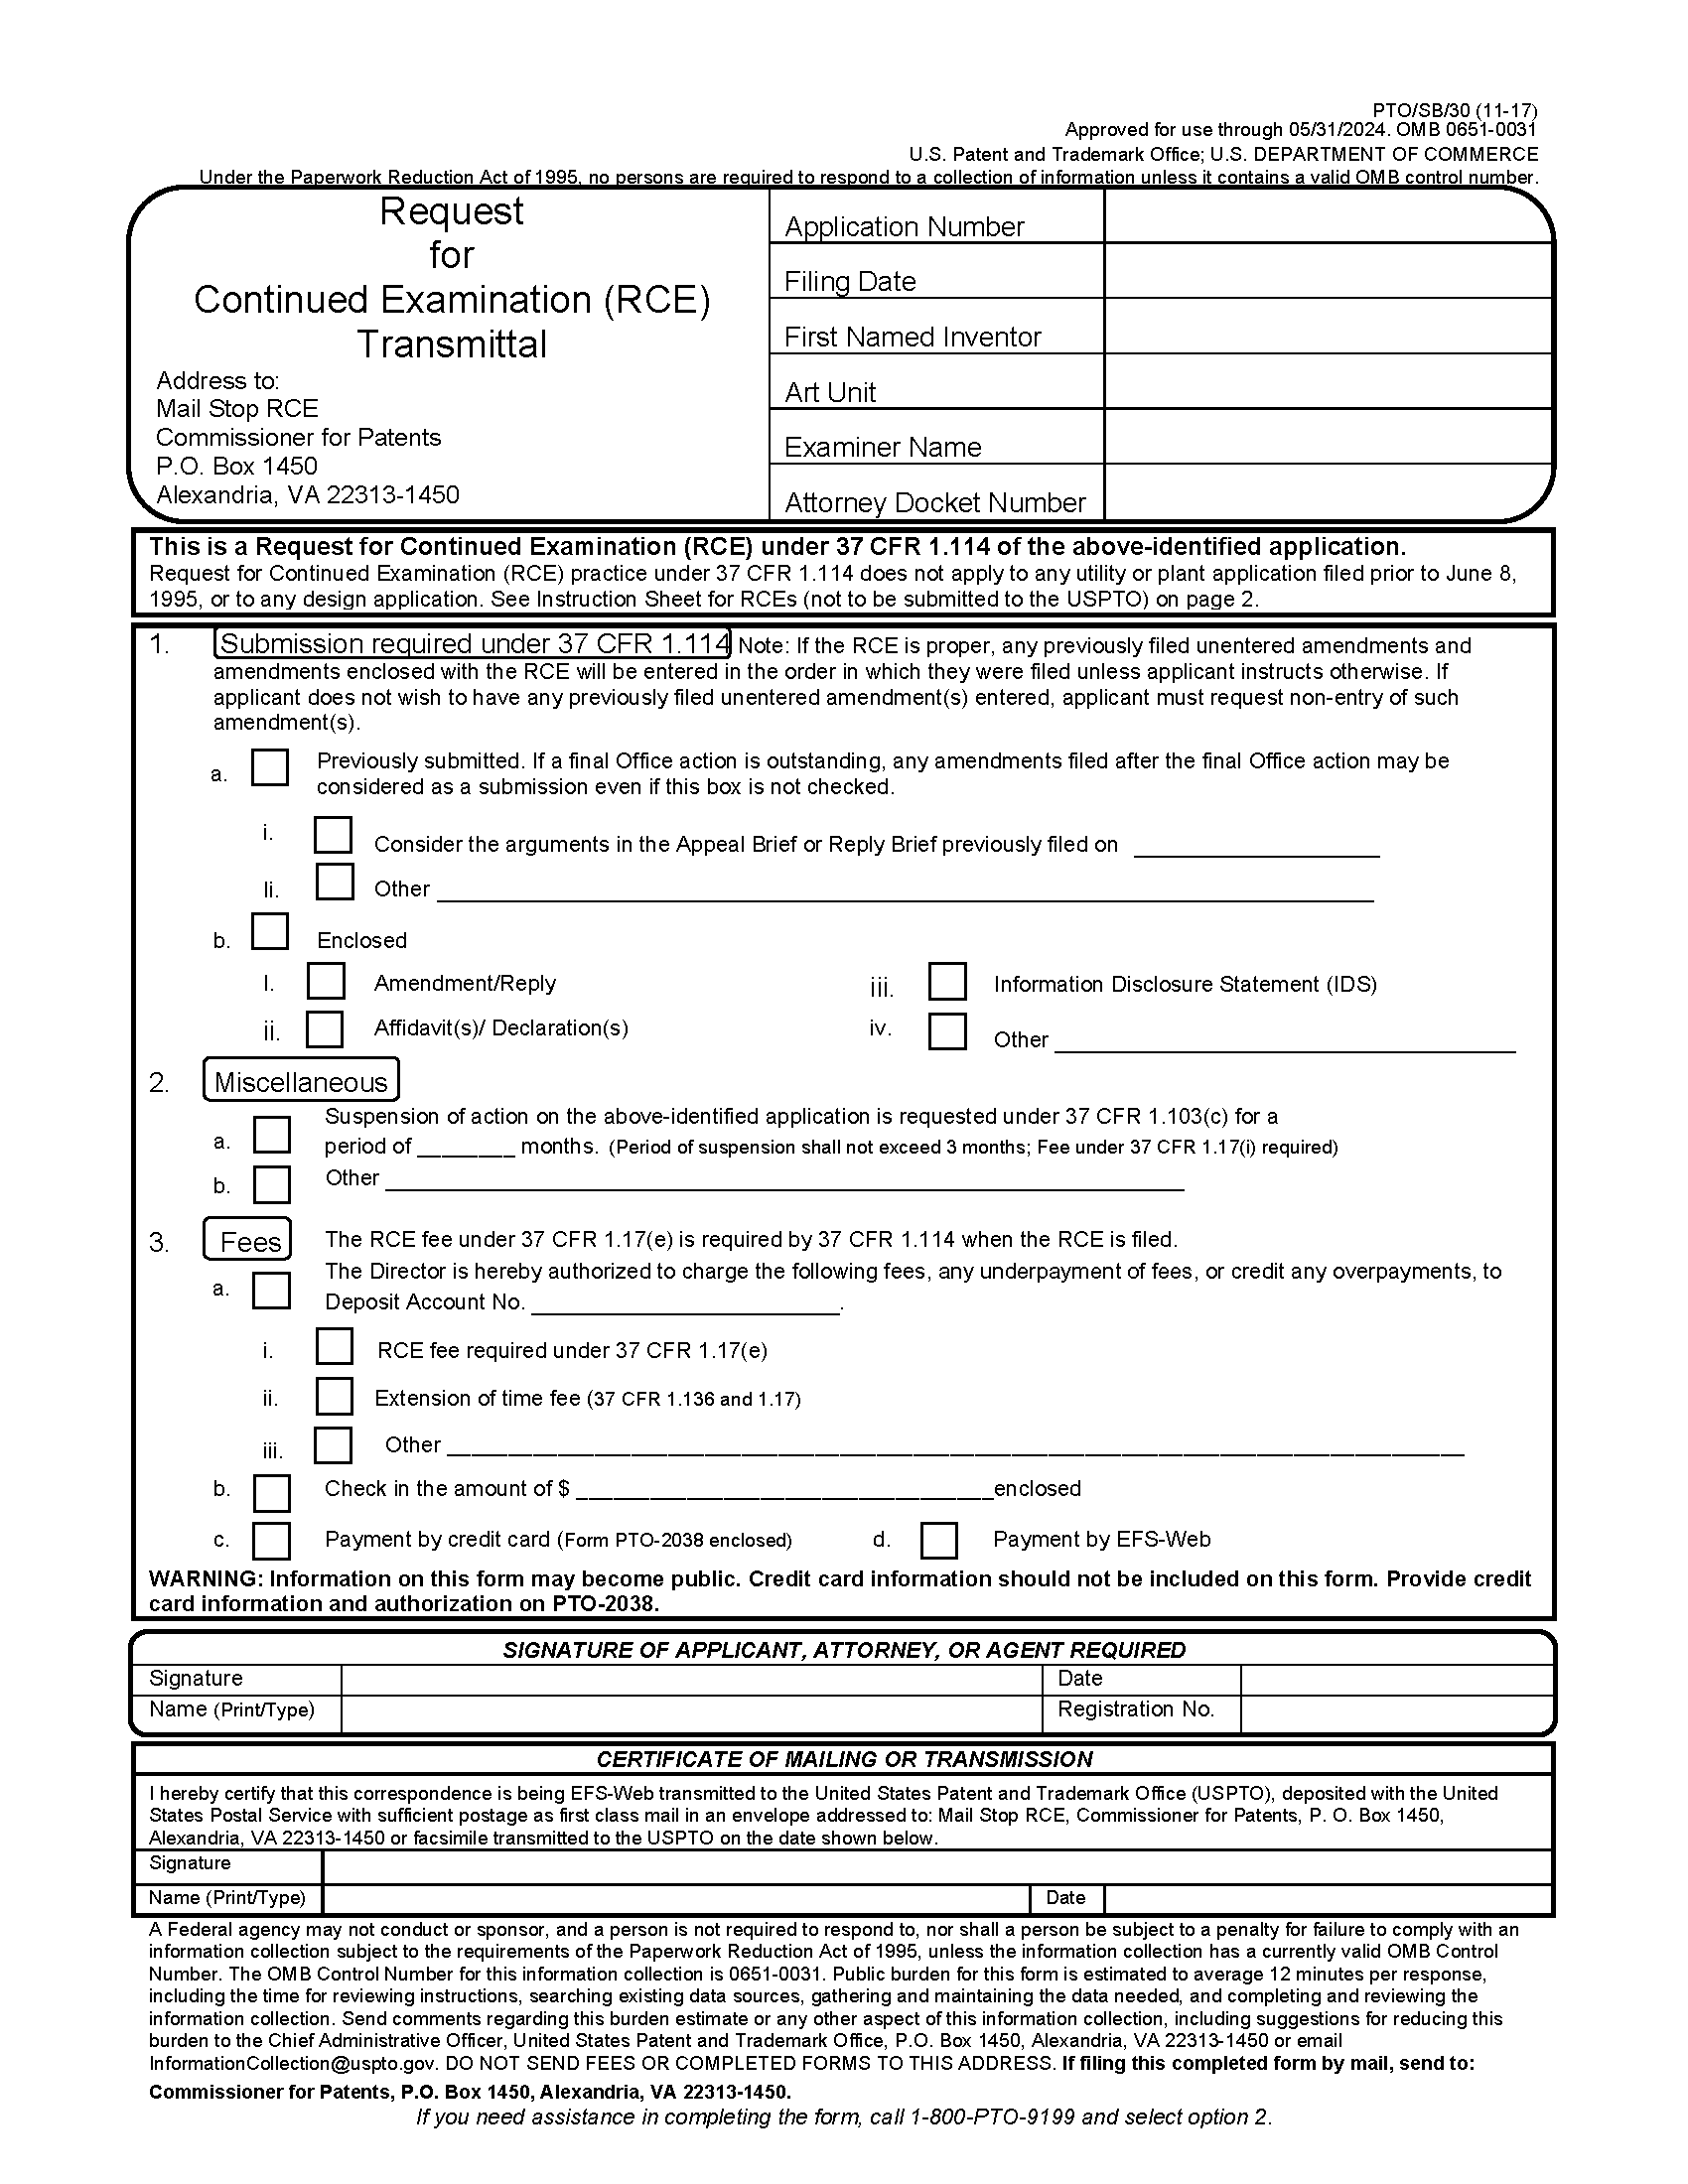 Form PTO/SB/30. Request for Continued Examination (RCE) Transmittal